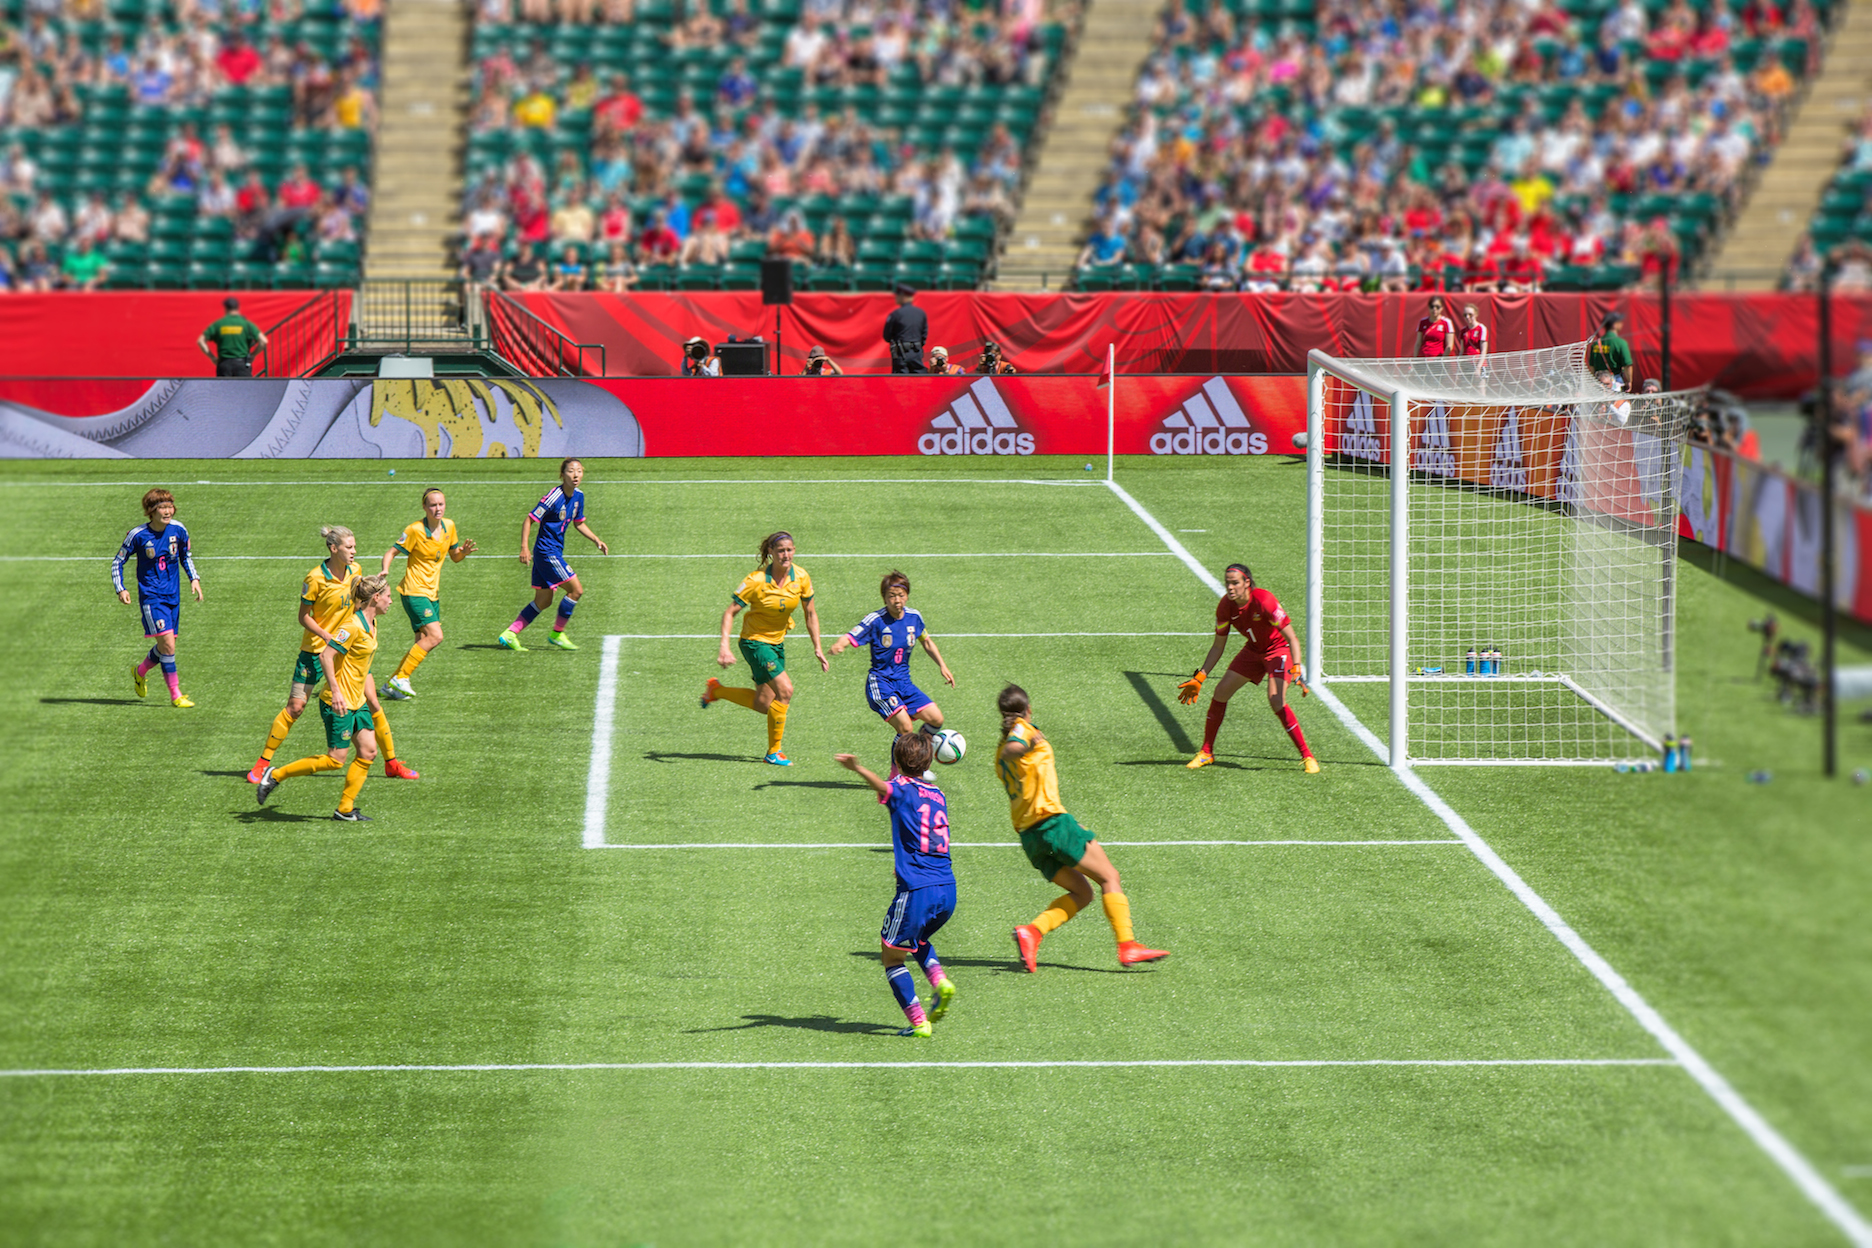 Women playing soccer at the FIFA women's world cup 2021.